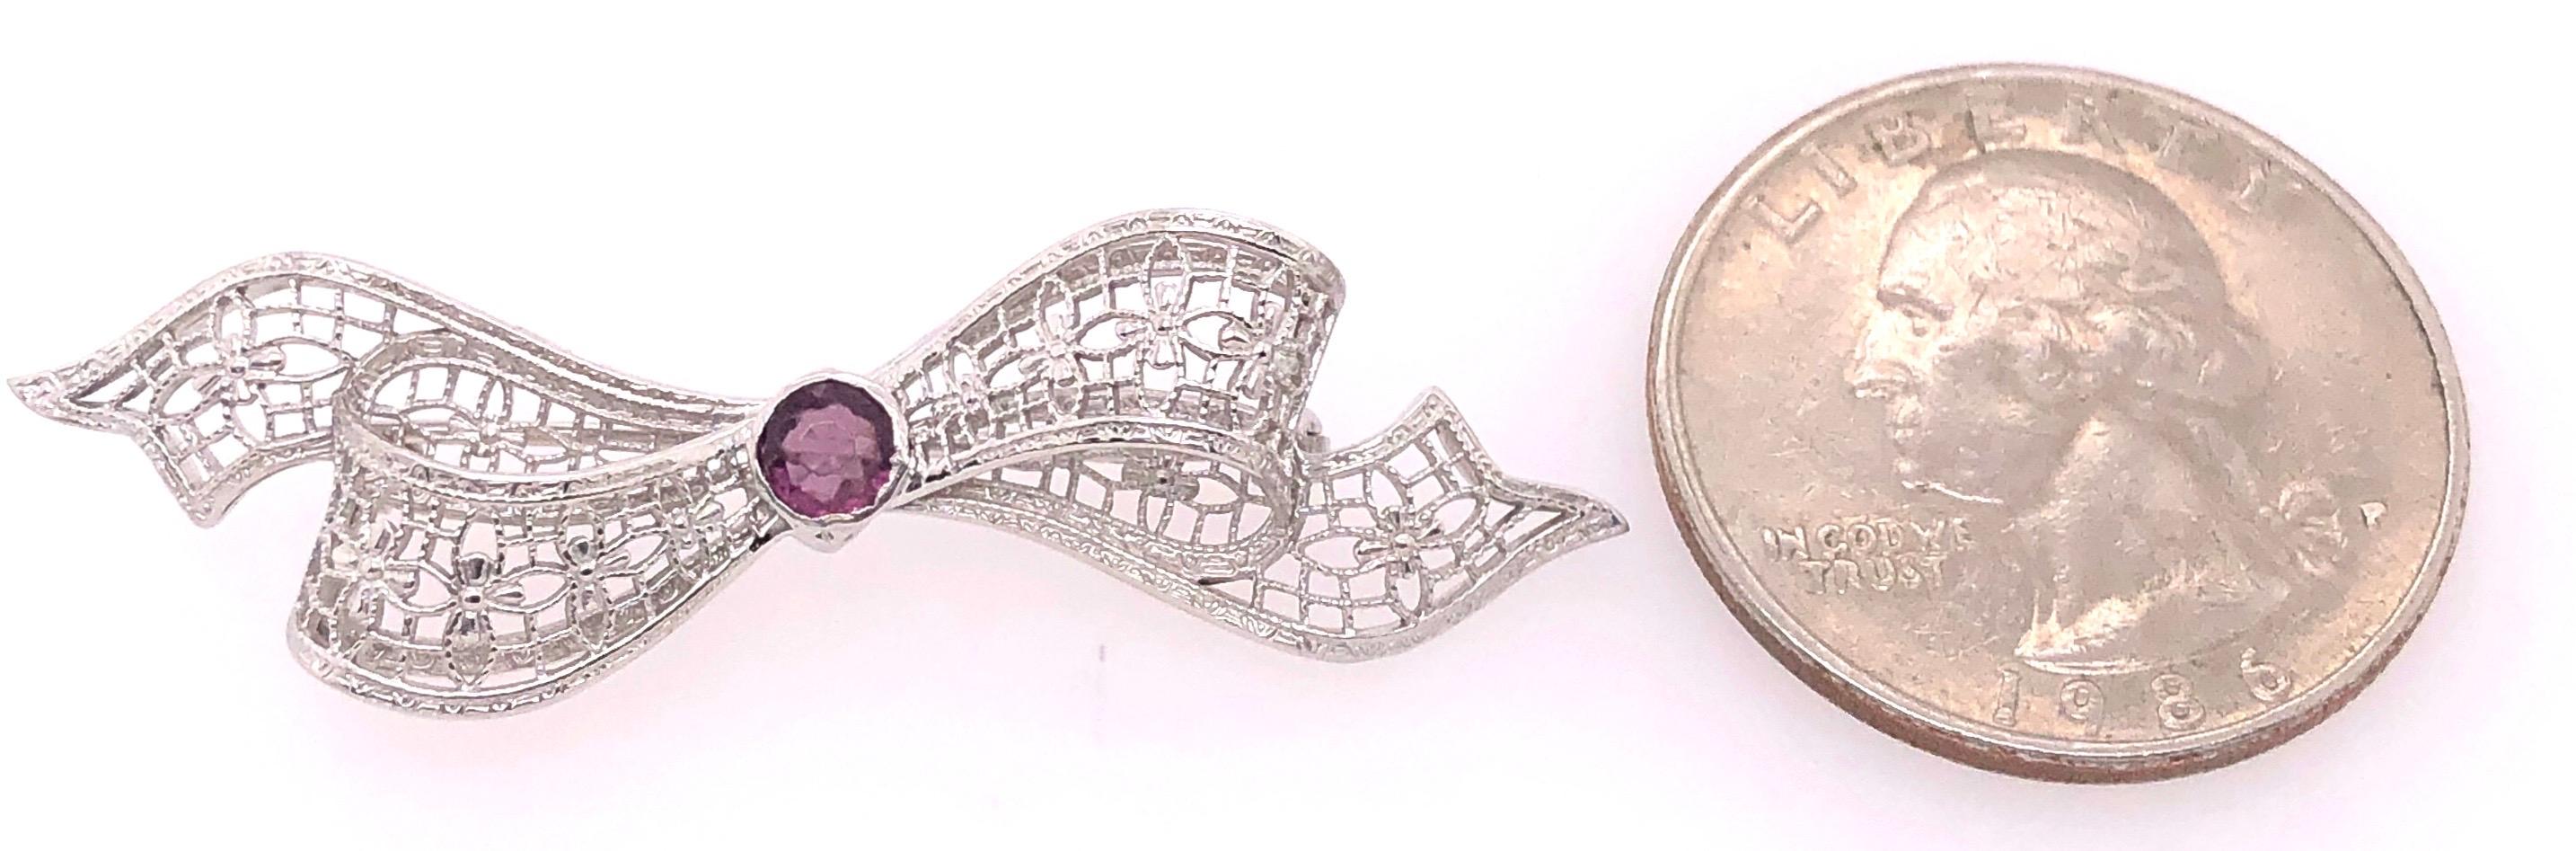 Round Cut 14 Karat White Gold Brooch Filigree Bow Design with Amethyst Center Stone Pin For Sale